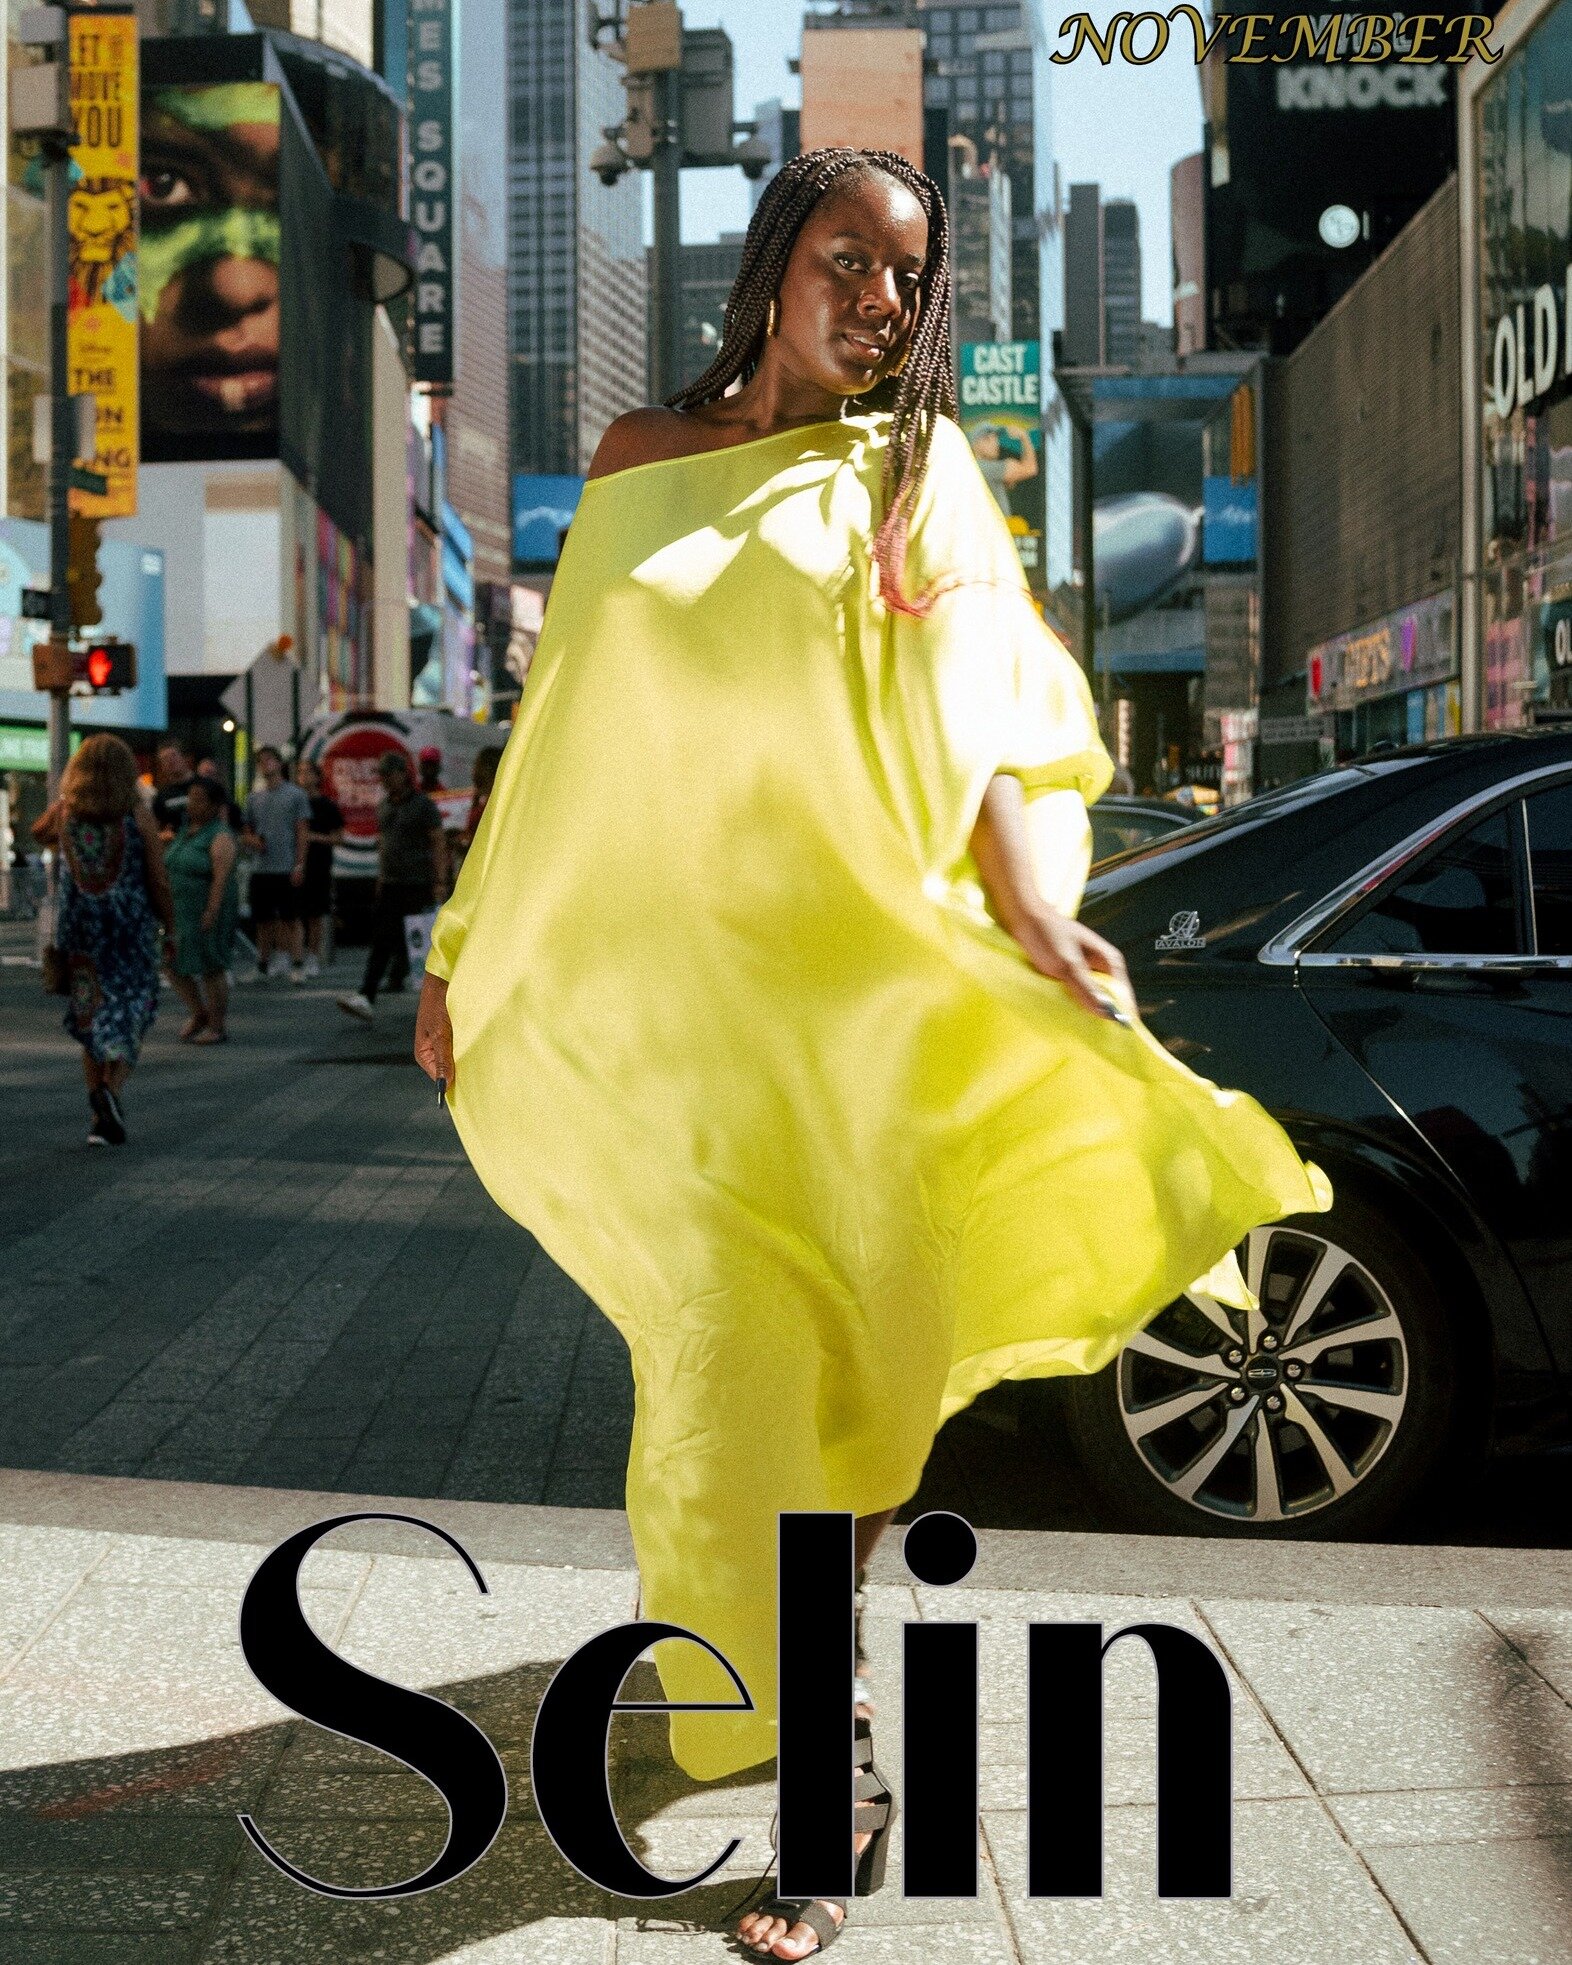 Our Plus Size NYC 2022 Finalist Jauvon Bell @von_the_model1  on the back cover of Netherlands based magazine Selin - November Issue! &quot;Glammin in the City&quot; 

Published by: @selin.magazine 
Photographer: @francisgum 
HMU: @makeupschoolnyc 
De